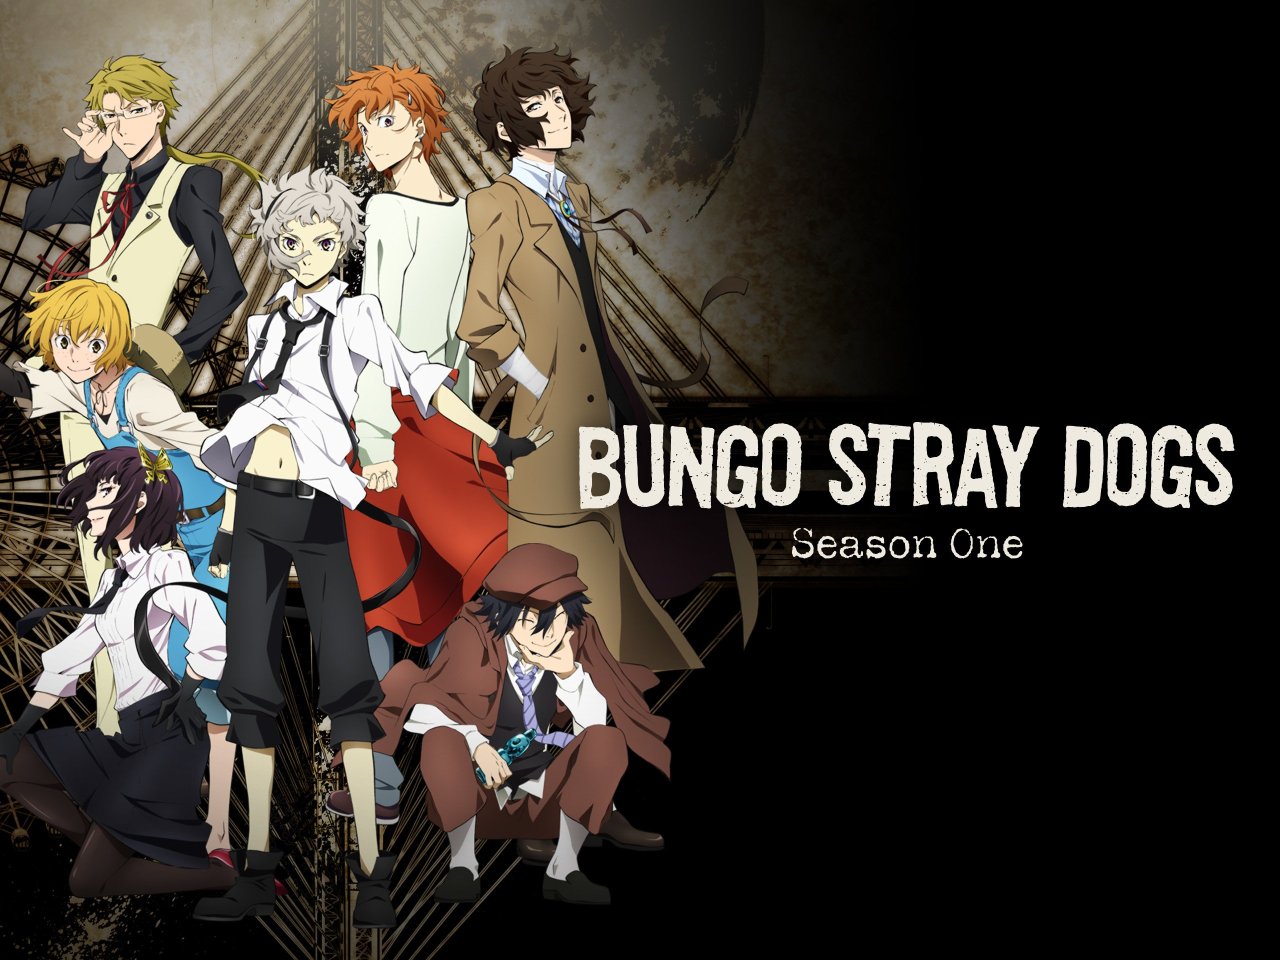 How to Watch 'Bungo Stray Dogs' in Order